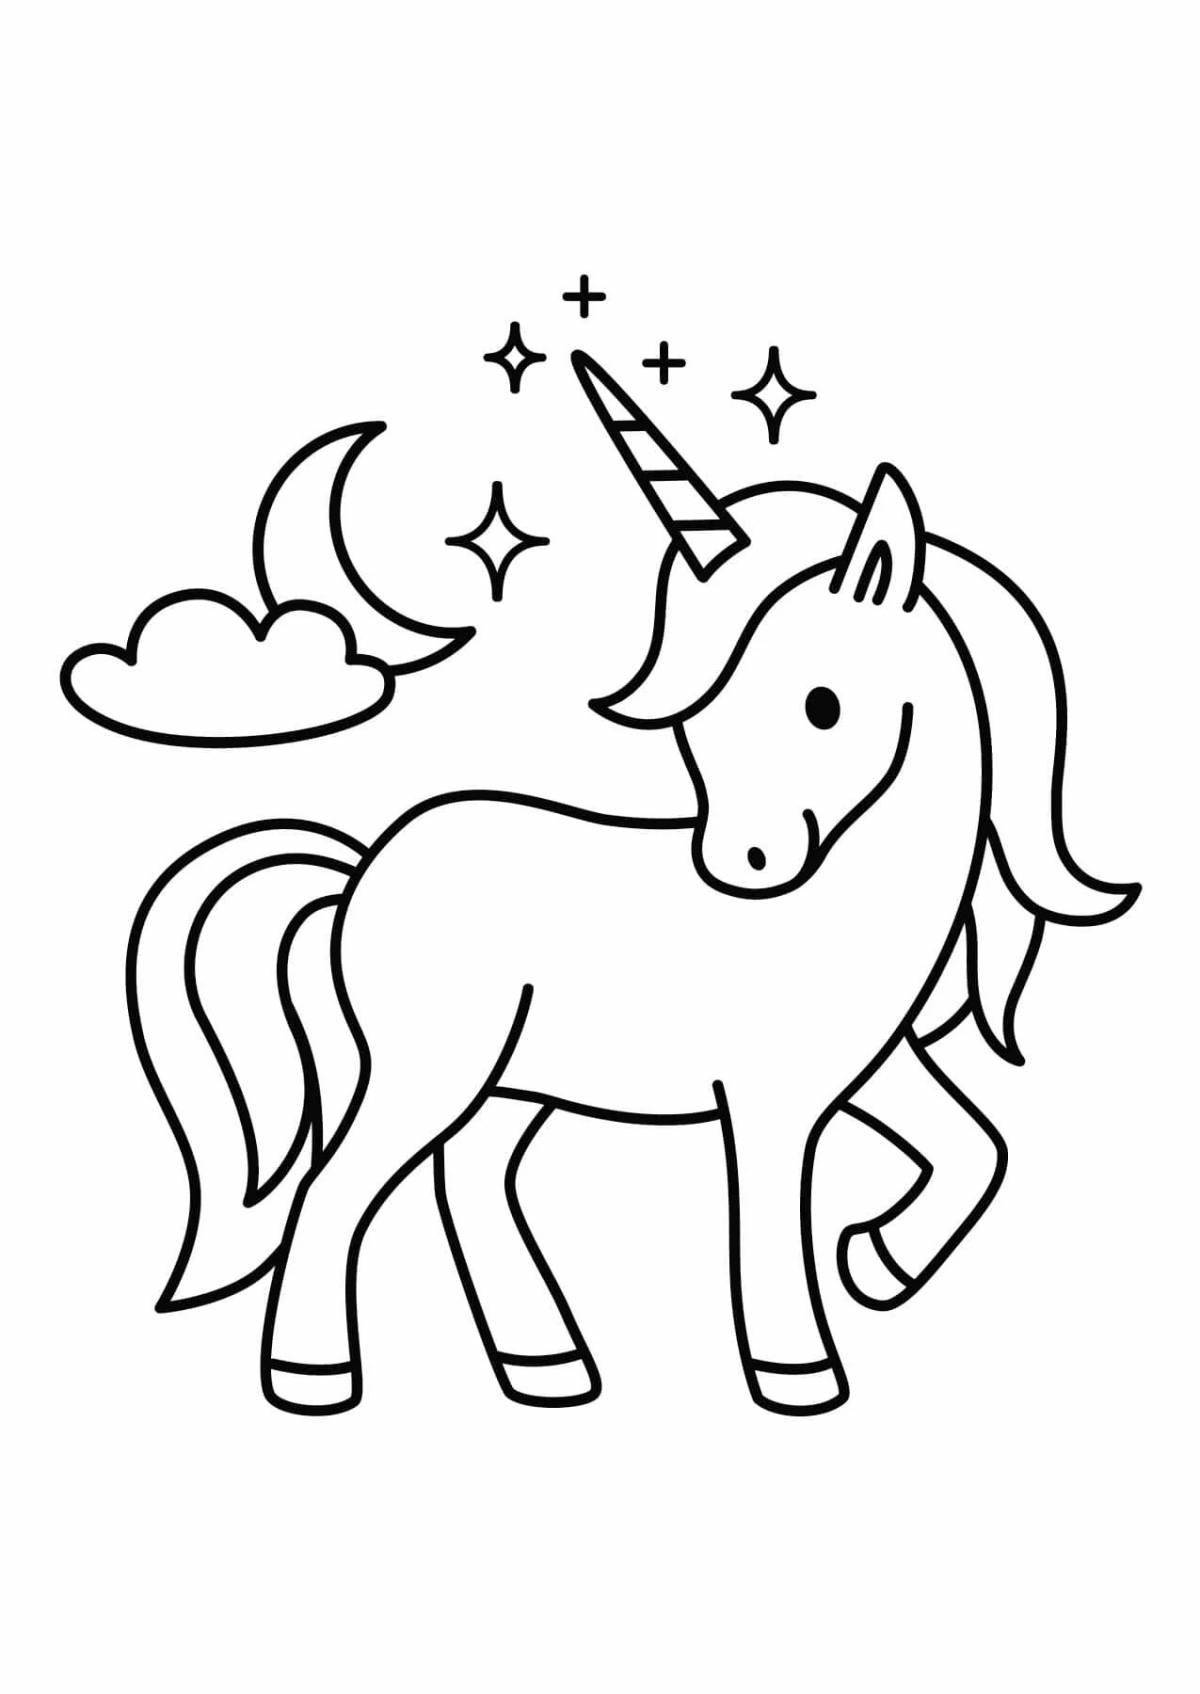 Radiant coloring page for kids unicorn